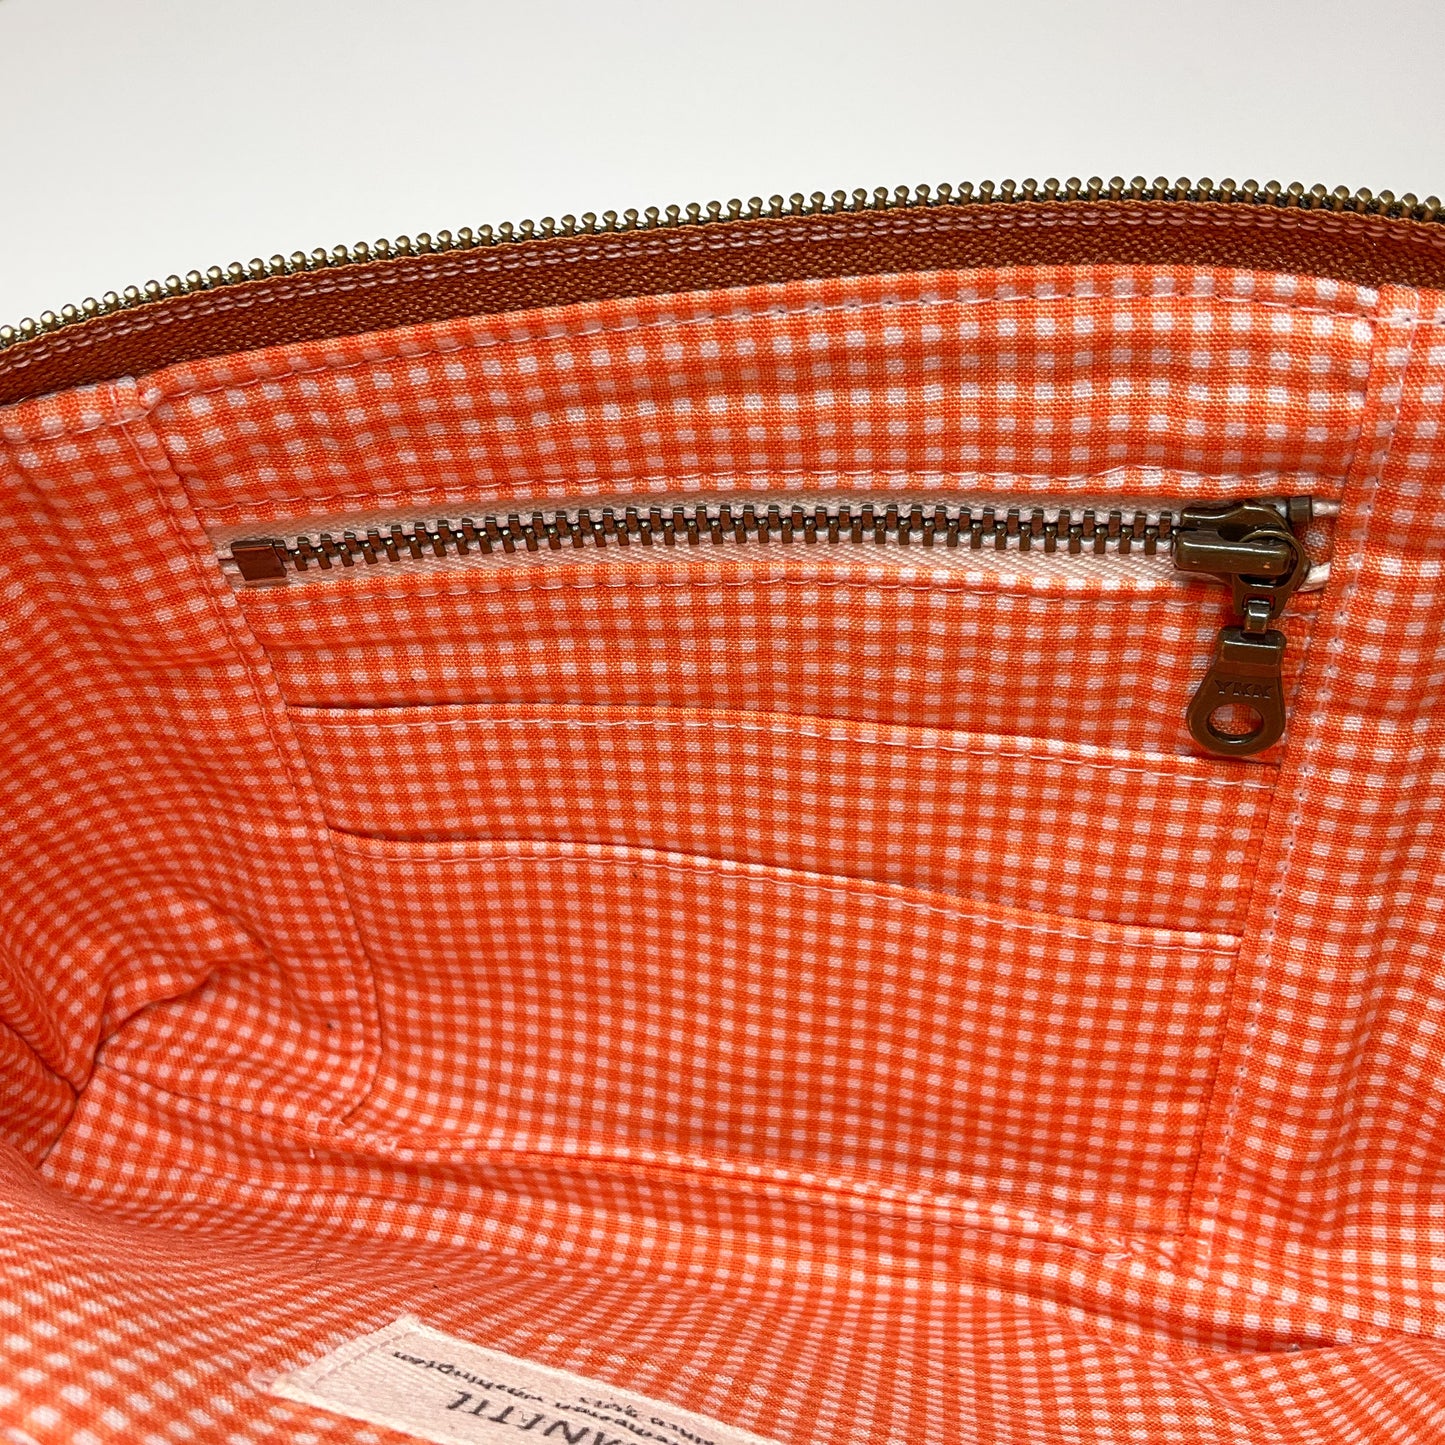 Yarrow Wristlet - Along the Fields in Strawberry/Rainstorm with Brown Leather Pocket #18